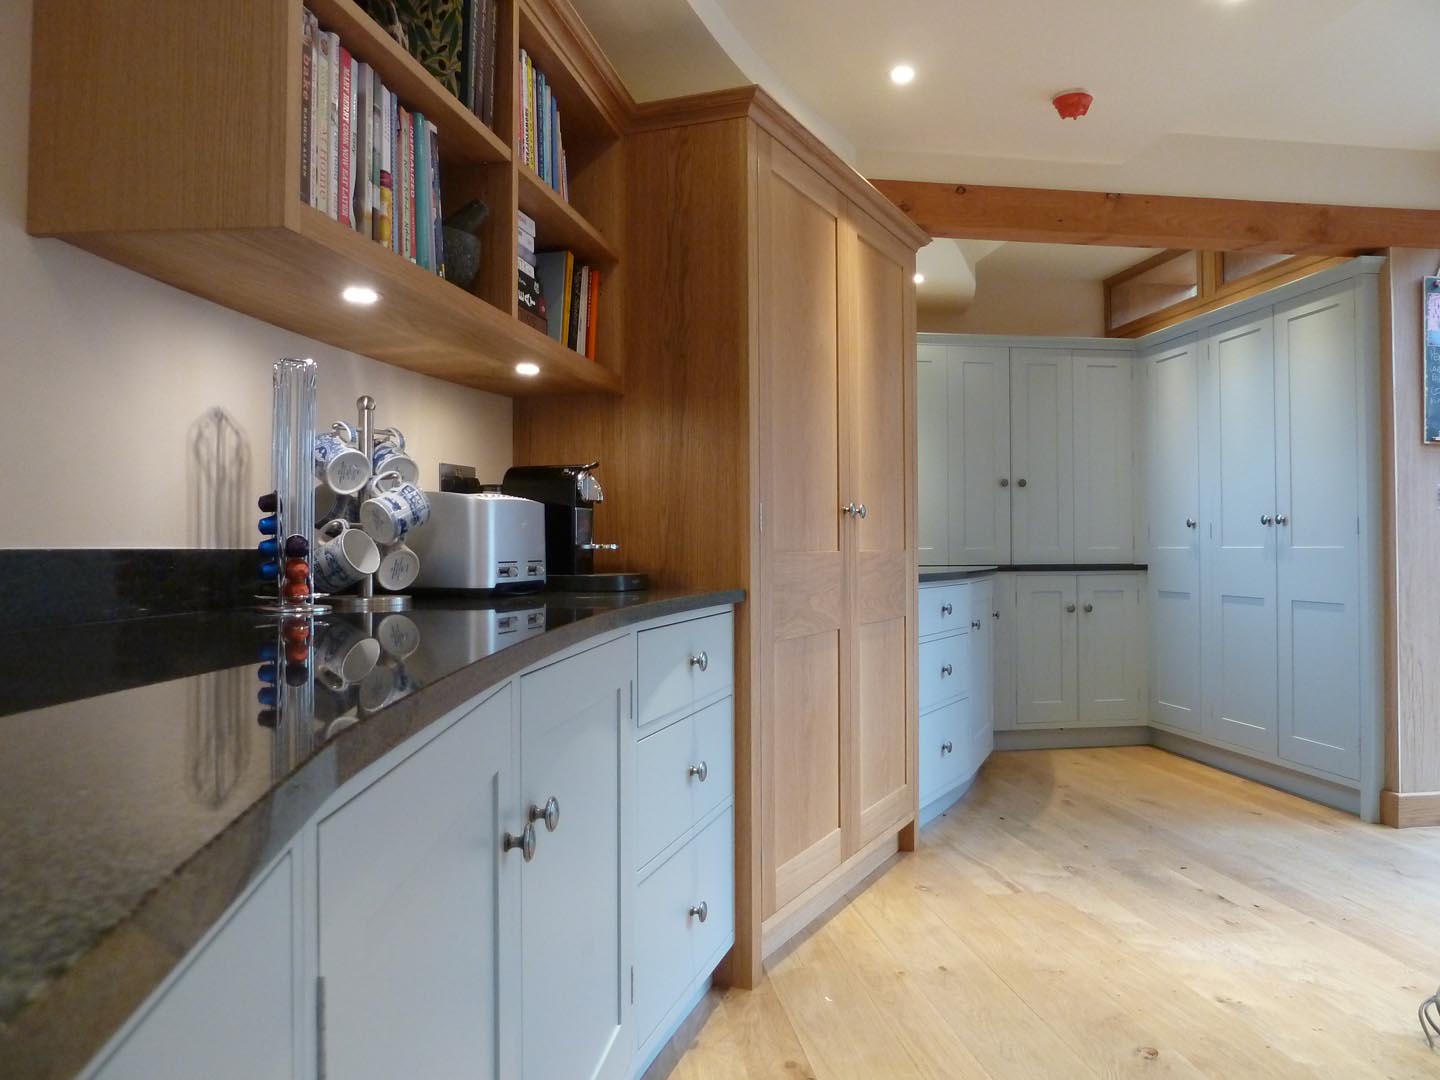 Modern Oak and painted kitchen with a curved/serpentine wall